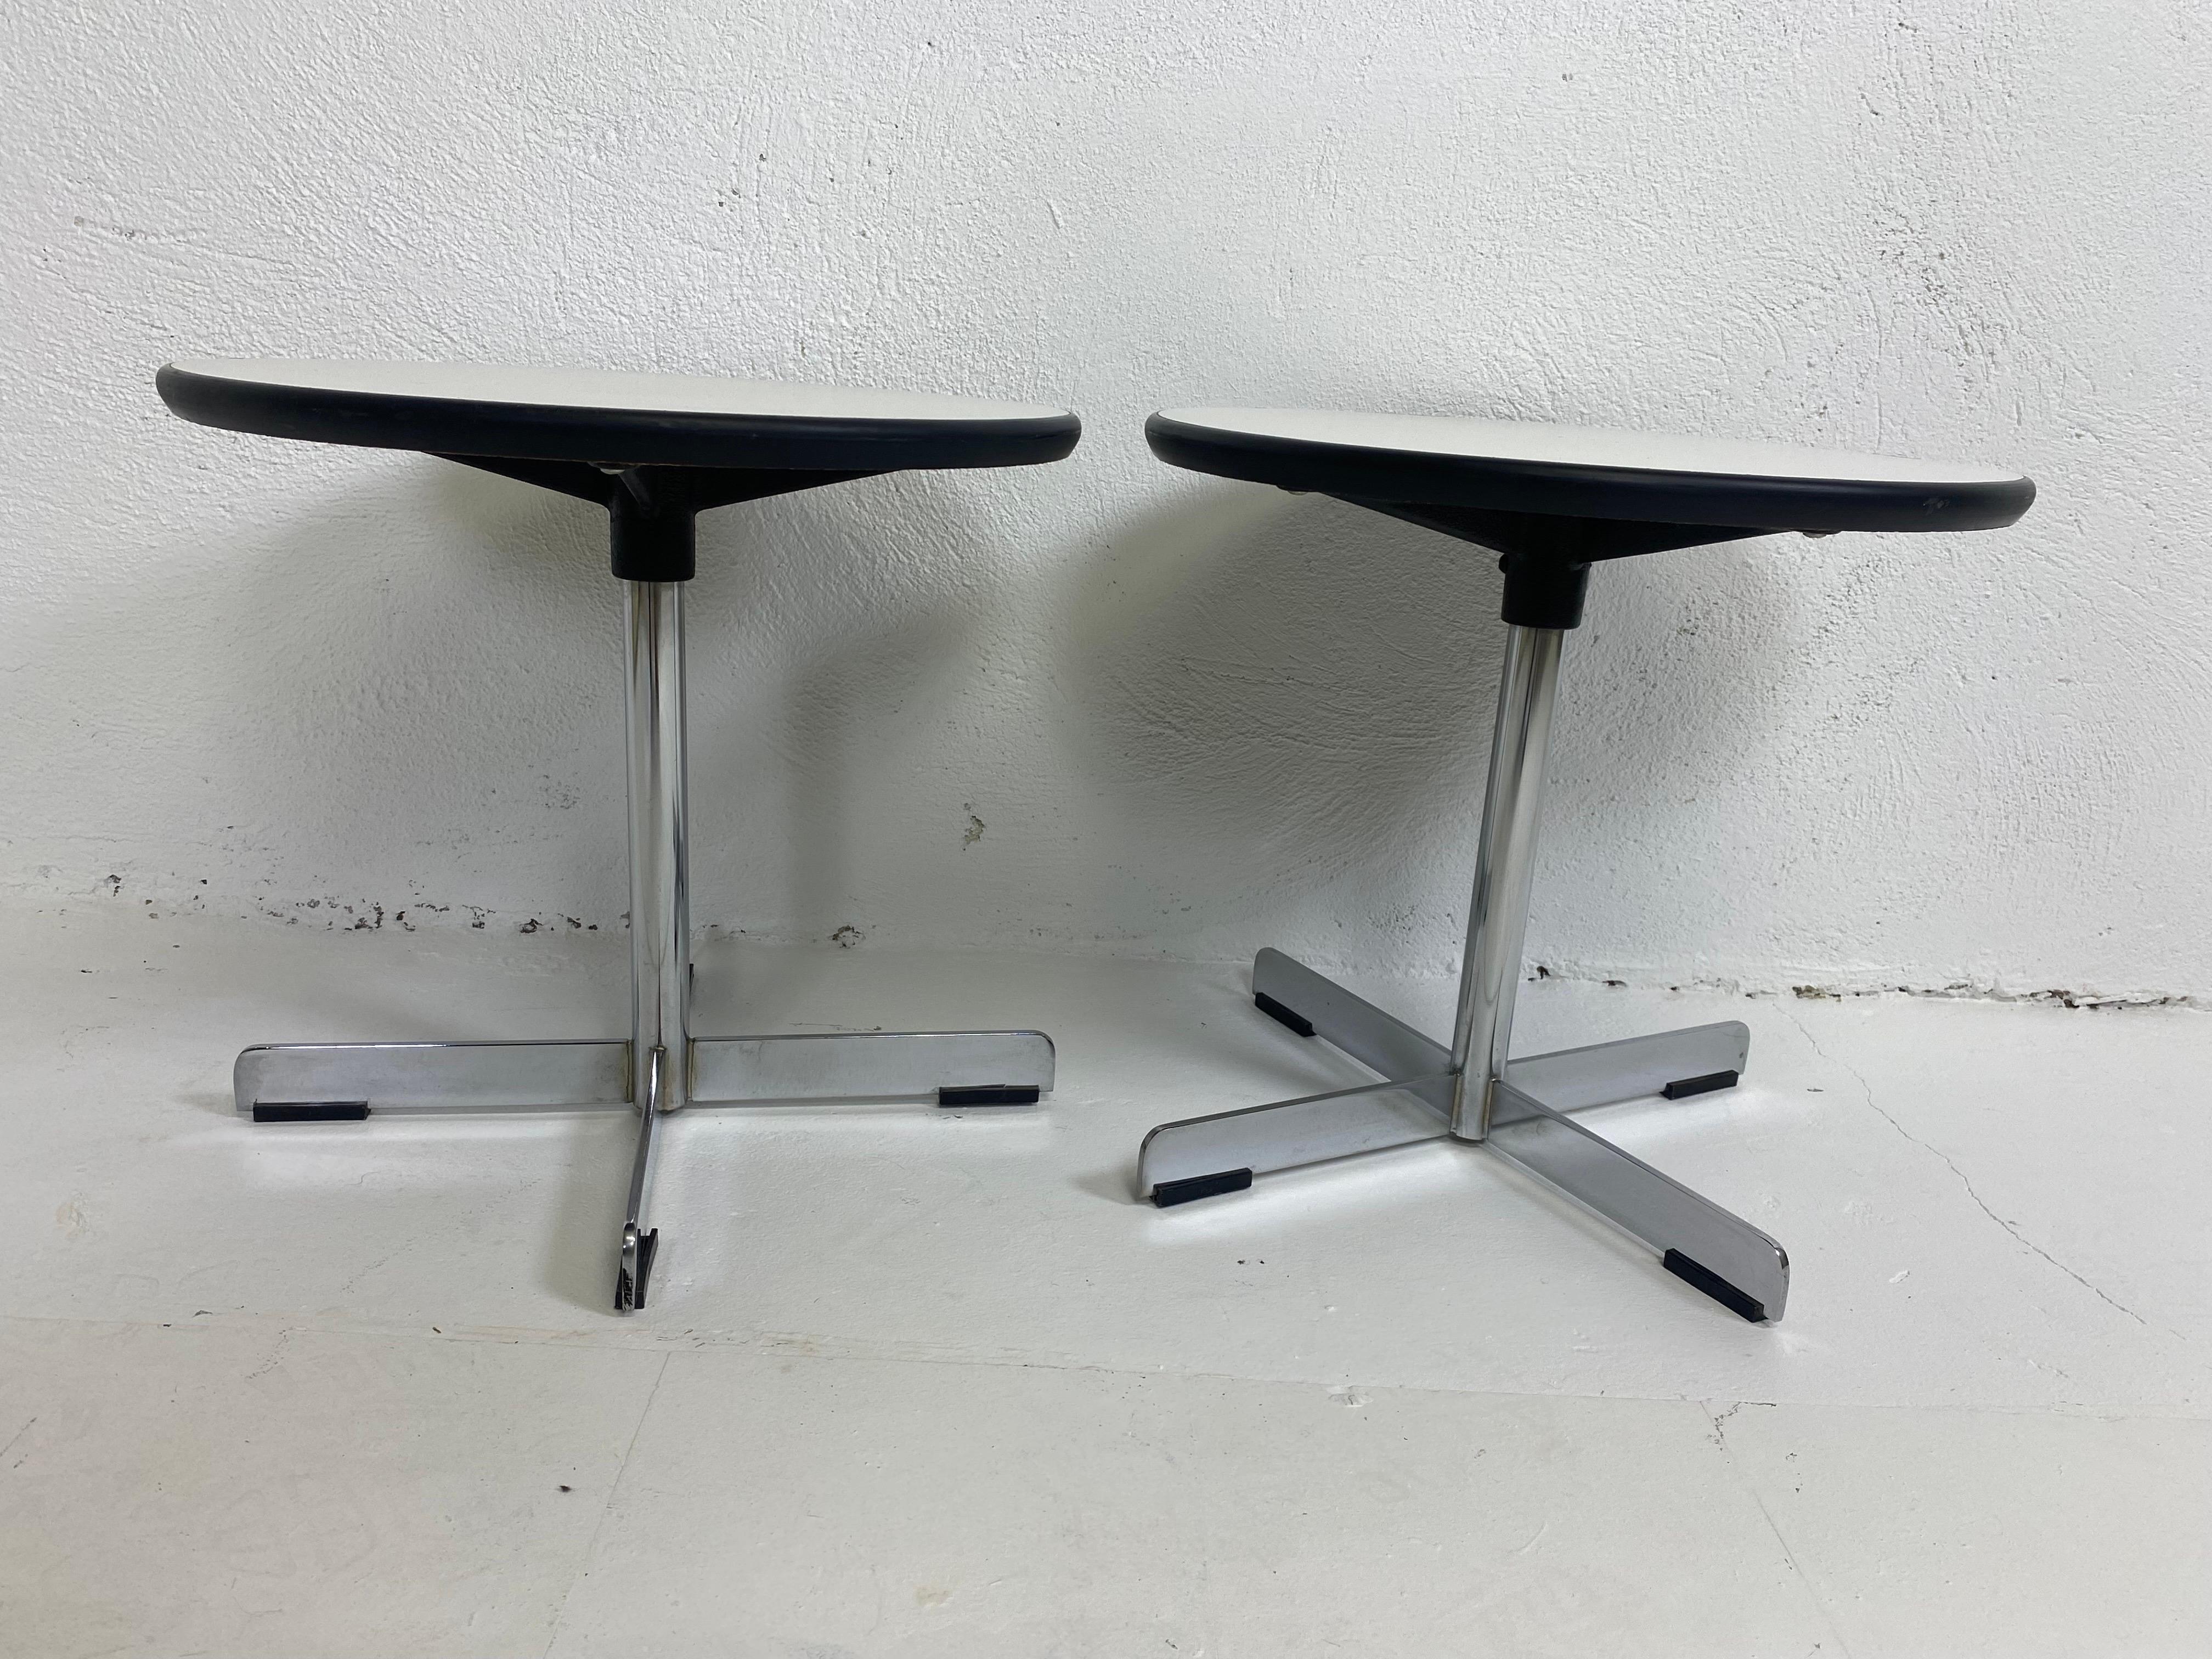 This is a pair of Mid-Century Modern diminutive martini tables/side tables. This pair of tables have a white laminate top with a black edge. The tables have a Chrome pedestal style leg. These tables are in the matter of Florence Knoll circa 1970.